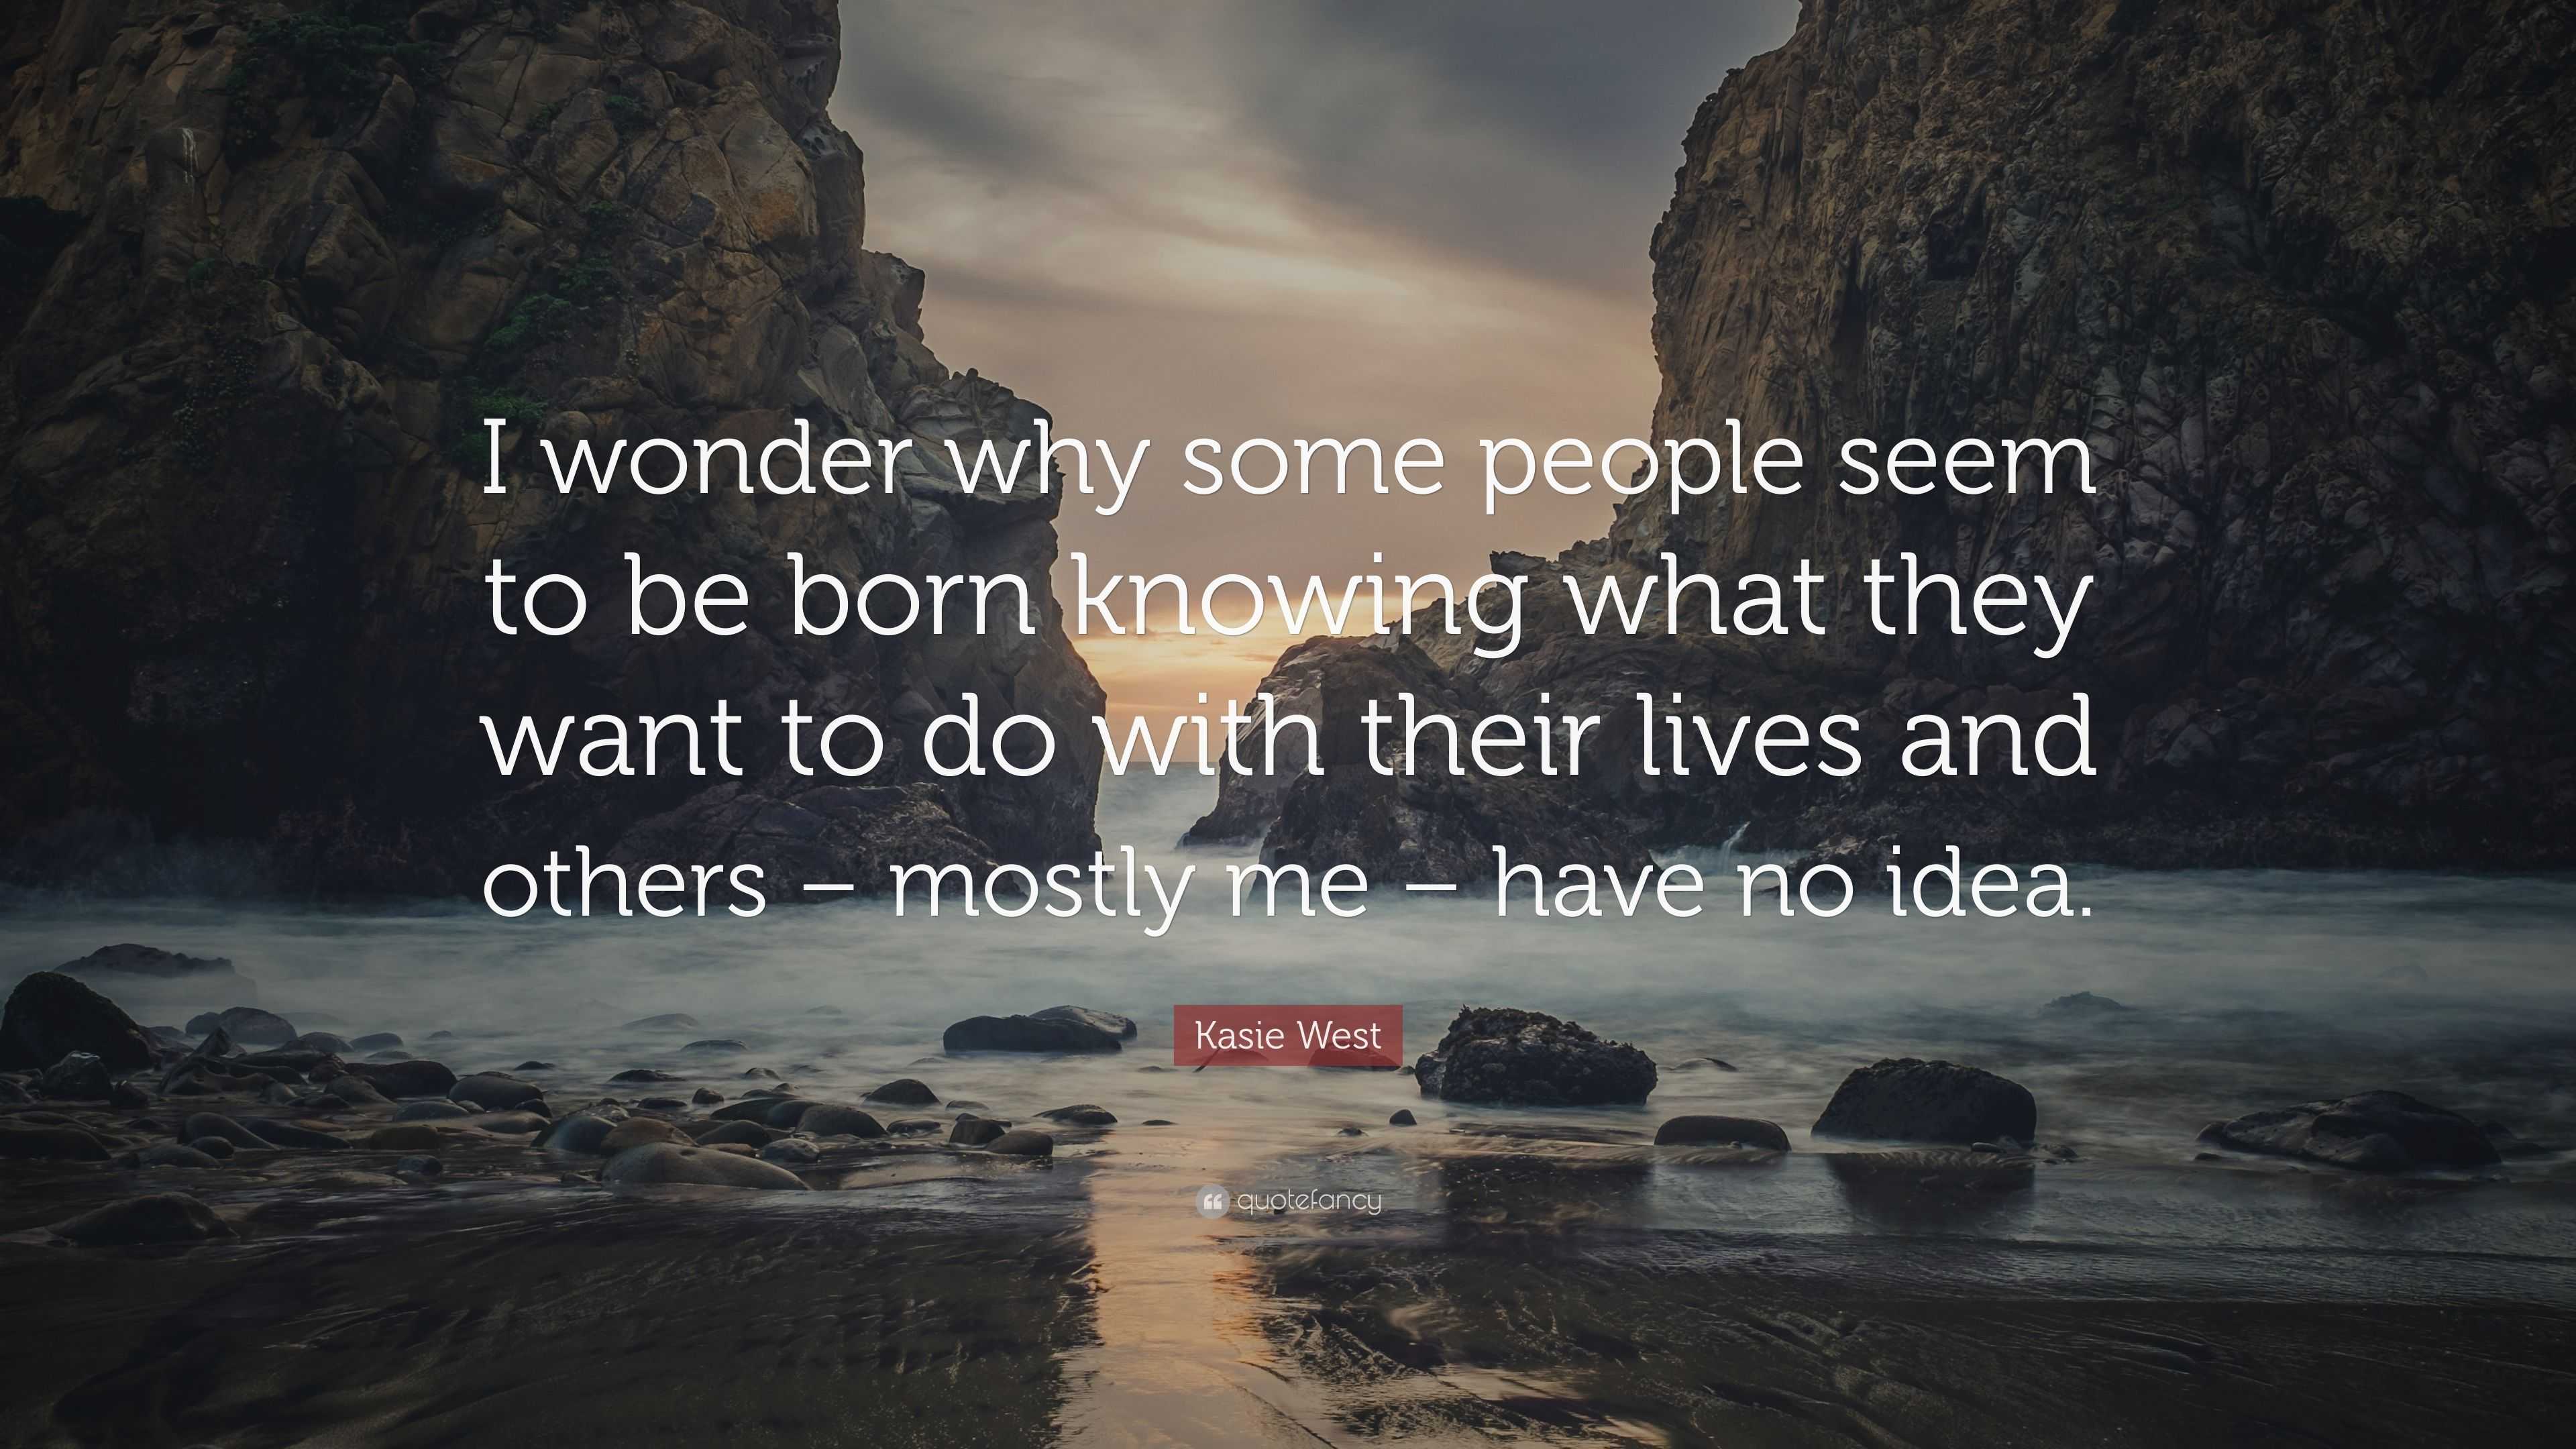 Kasie West Quote: “I wonder why some people seem to be born knowing ...